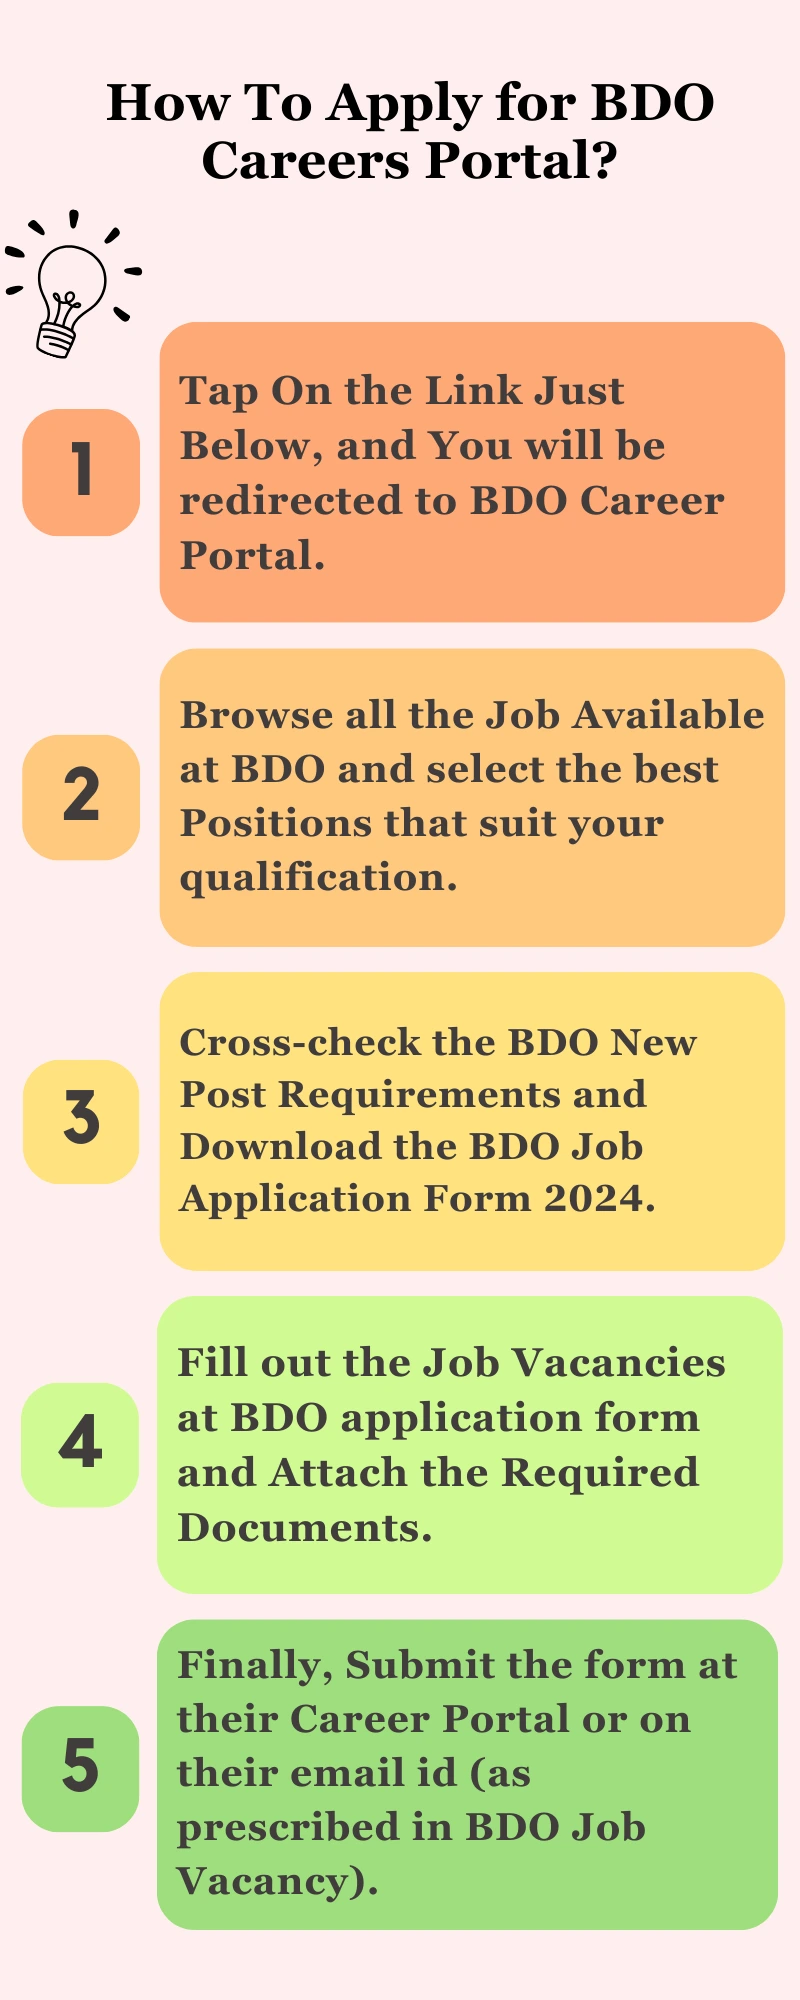 How To Apply for BDO Careers Portal?